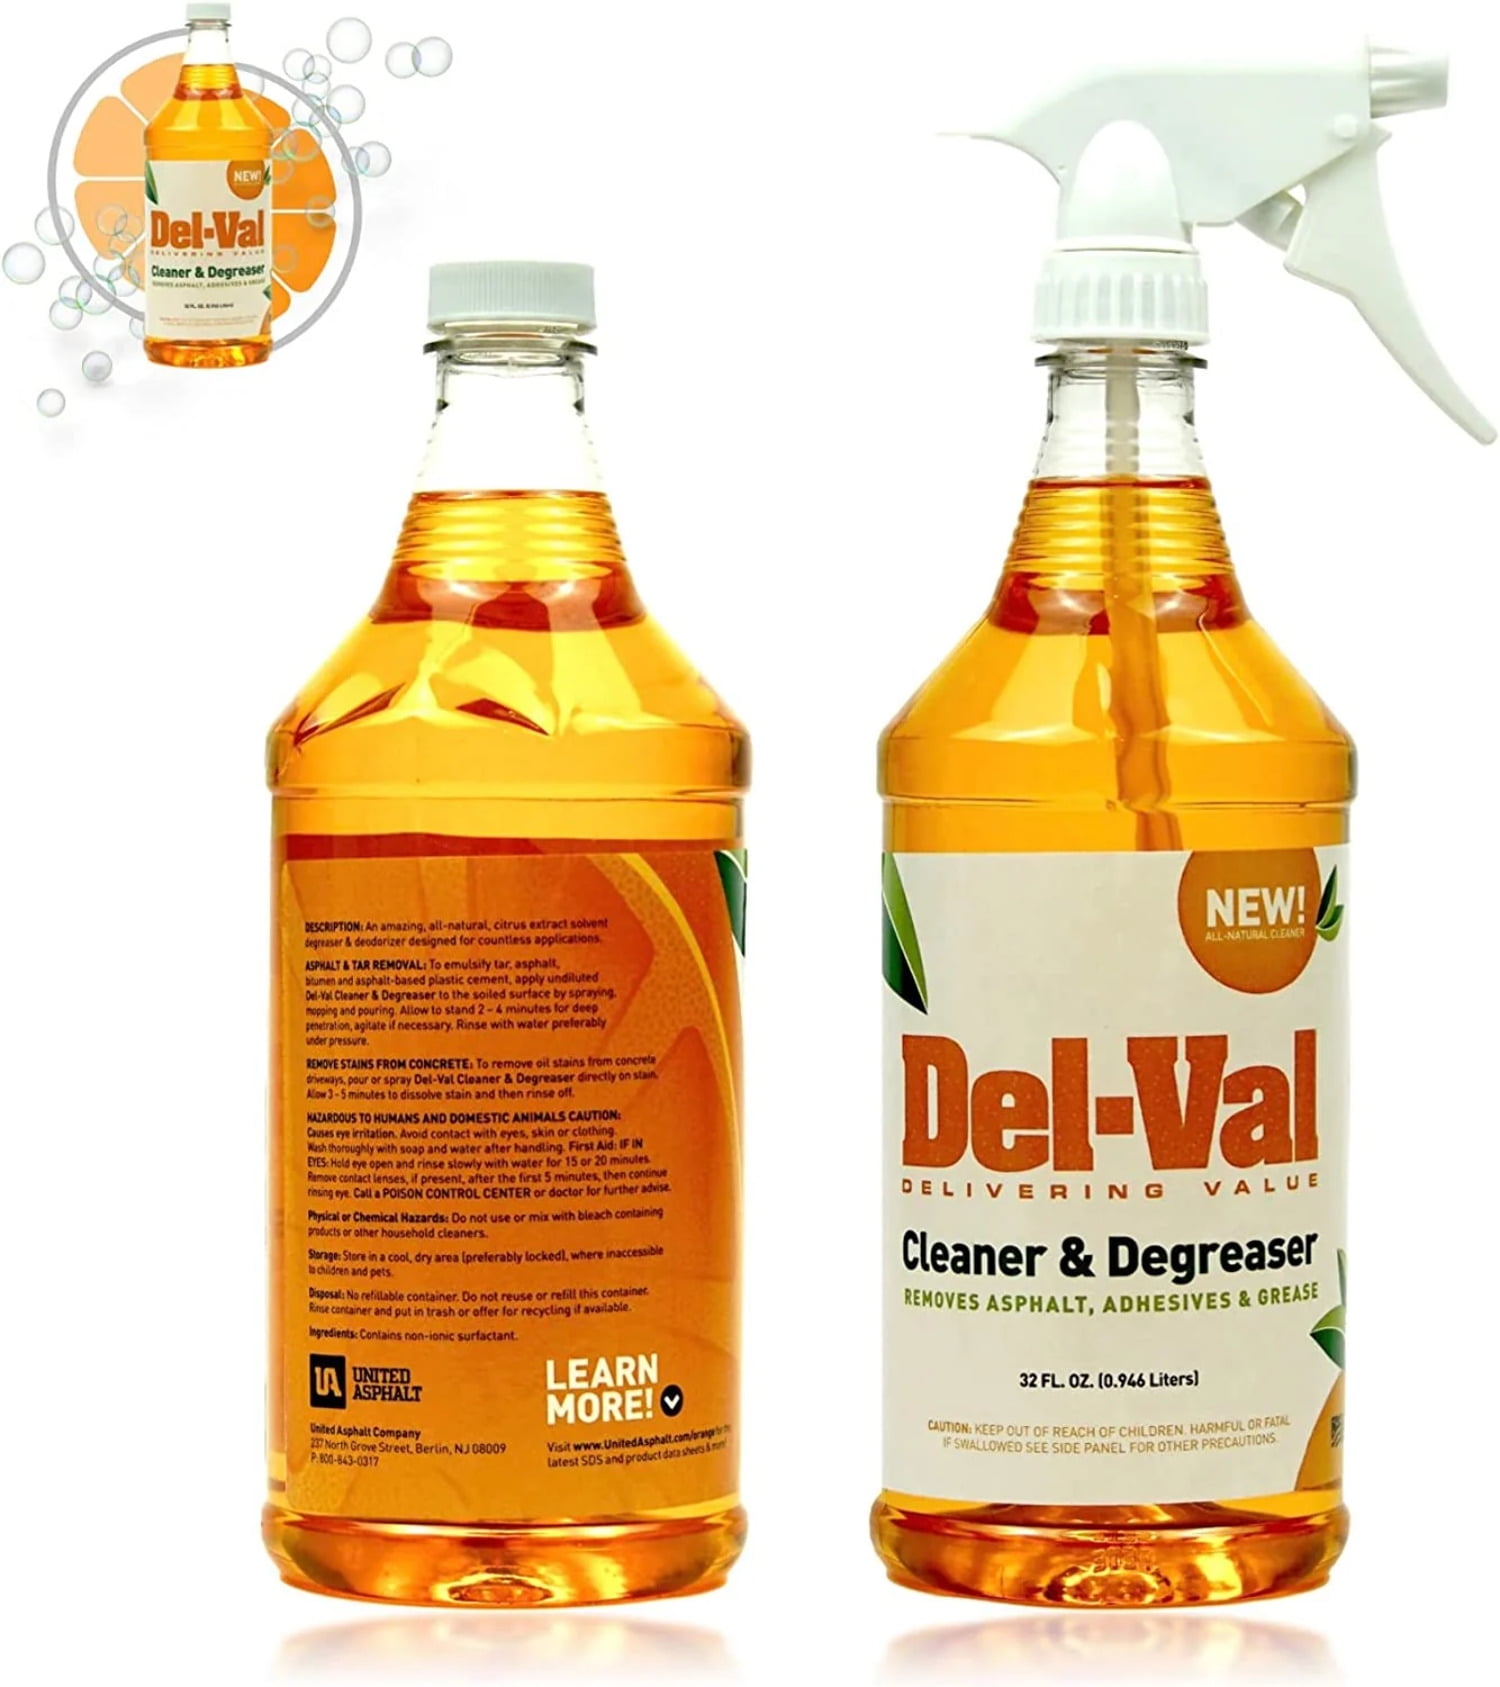 Heavy Duty Degreaser Yellow 1 Gal – Walt's Polish– The Leader in Auto  Detailing Supplies